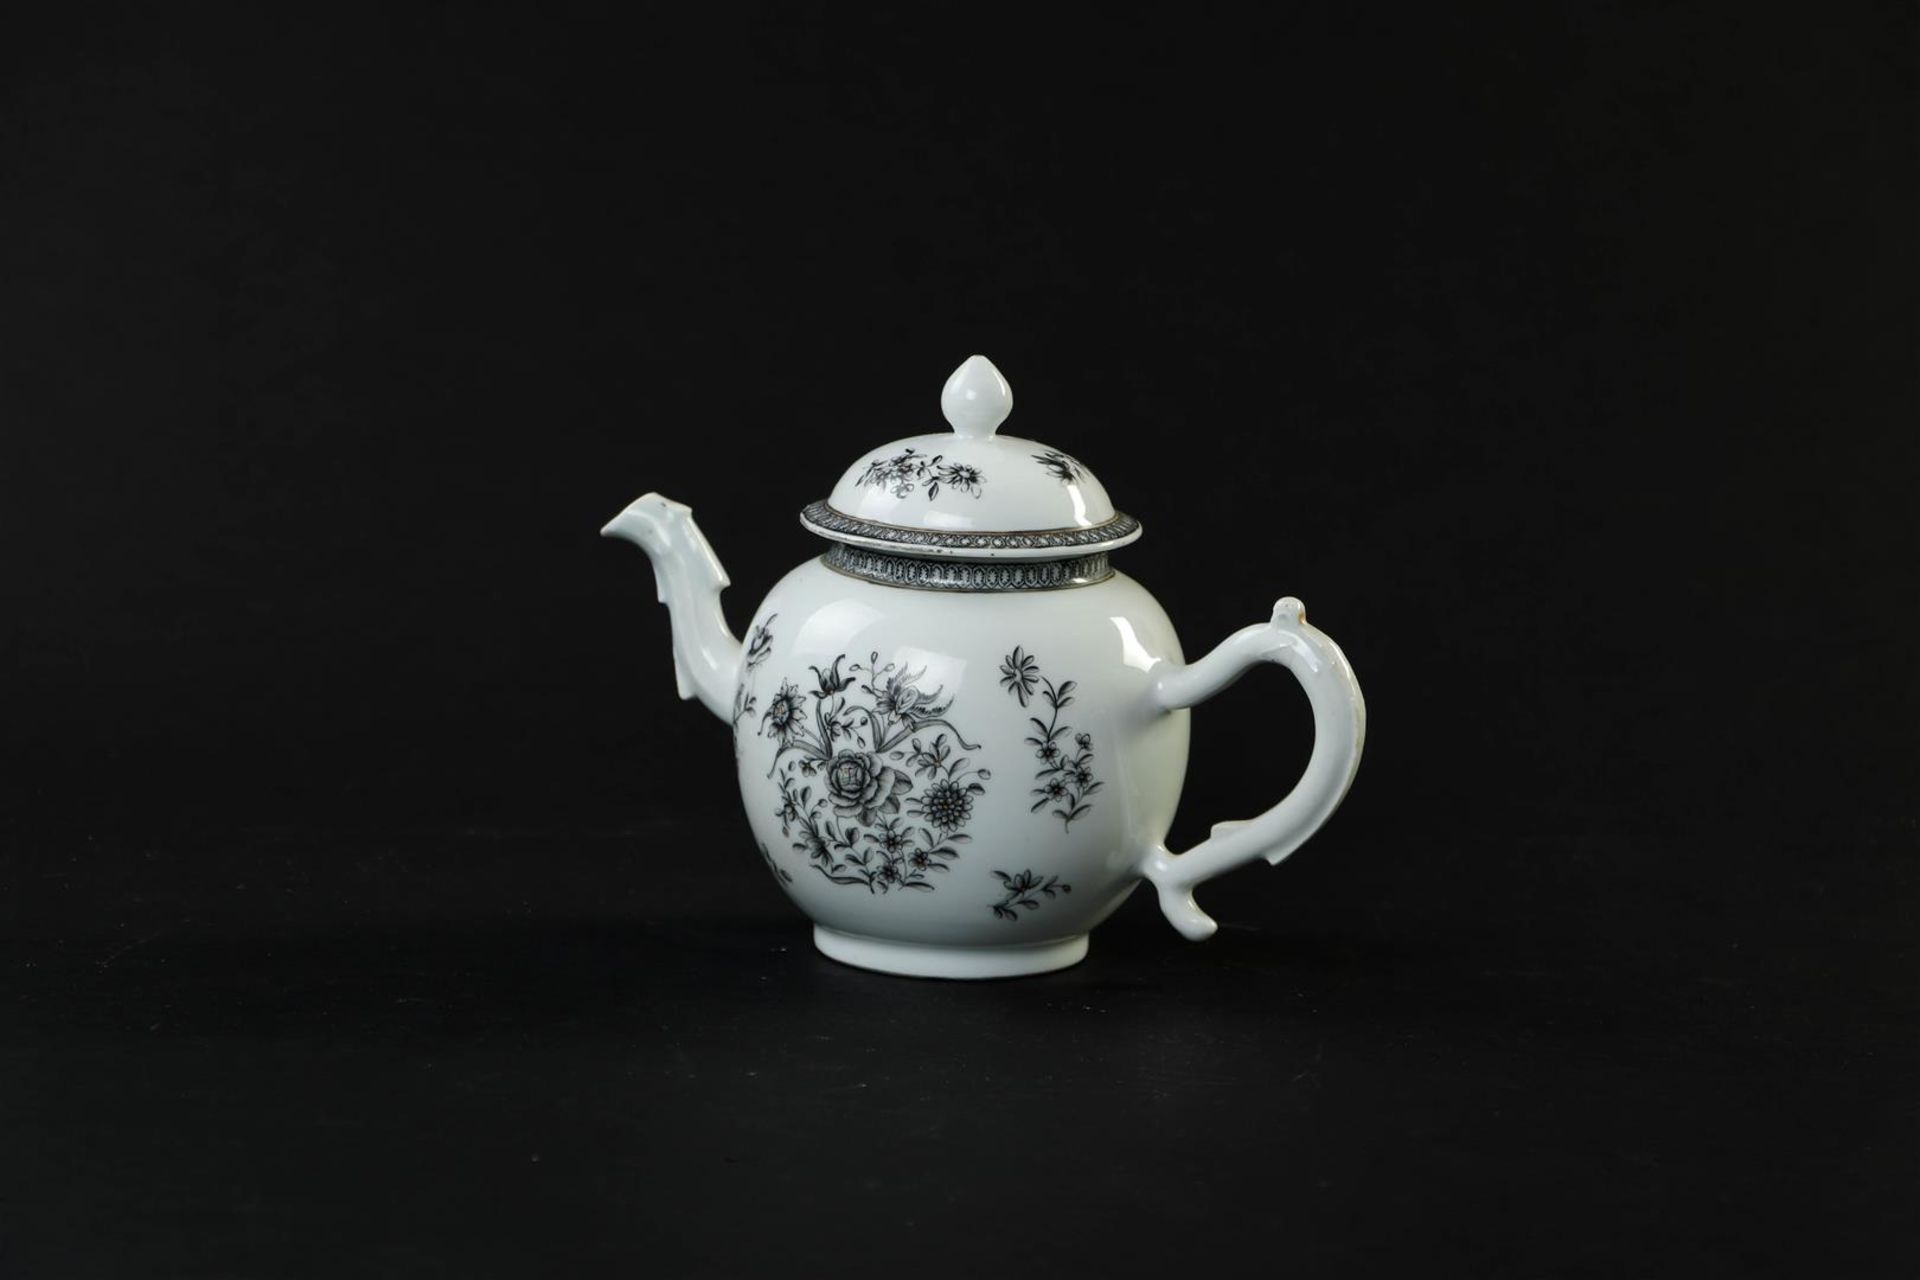 An Encre de Chine tableware set consisting of a teapot, milk jug, tea caddy, patty pan and spoon tra - Image 5 of 24